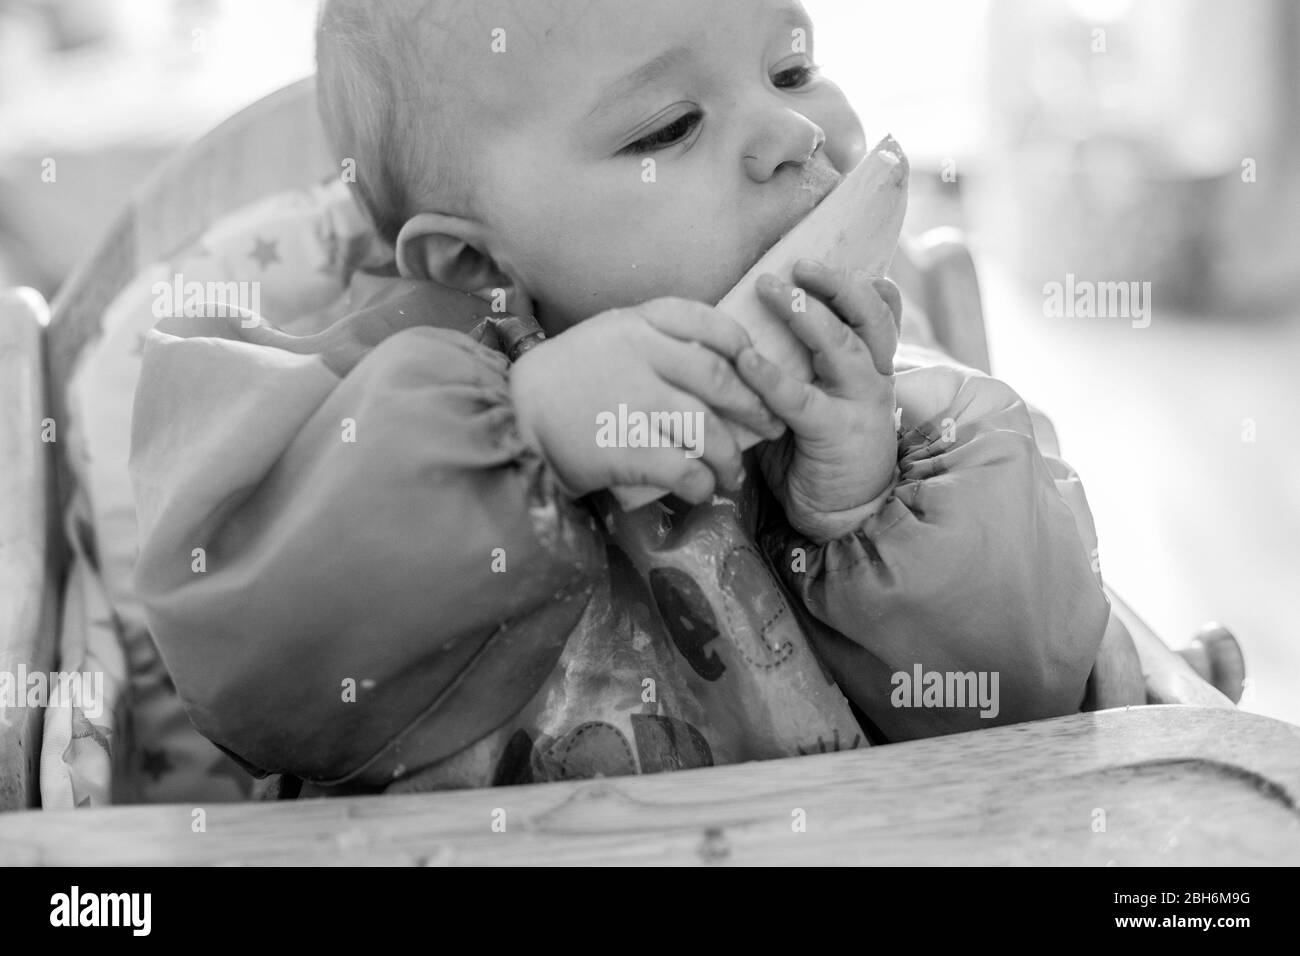 Cute baby eating from high chair Stock Photo